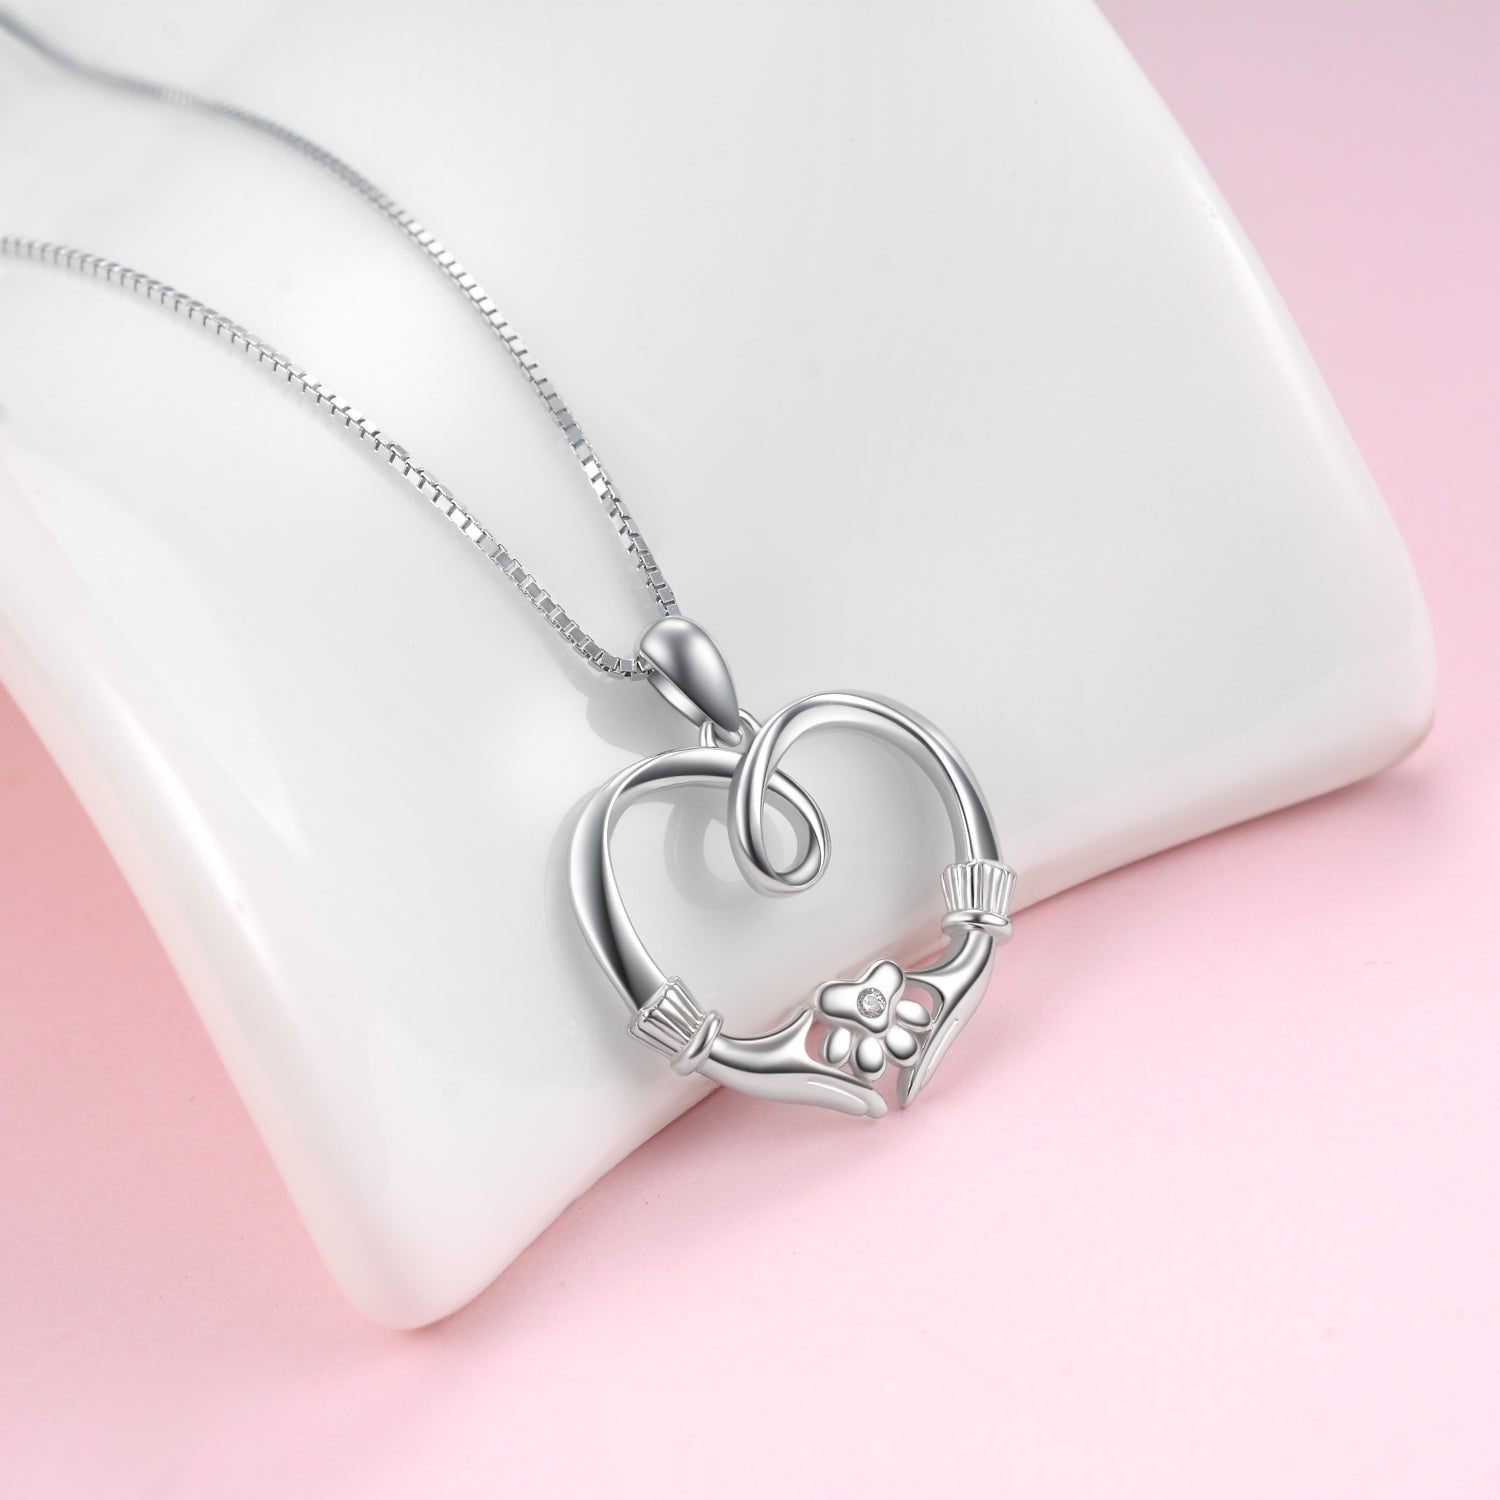 Fashion Dainty Chain Delicate Heart Necklace, Mother Birthday Gift Pendant Necklace